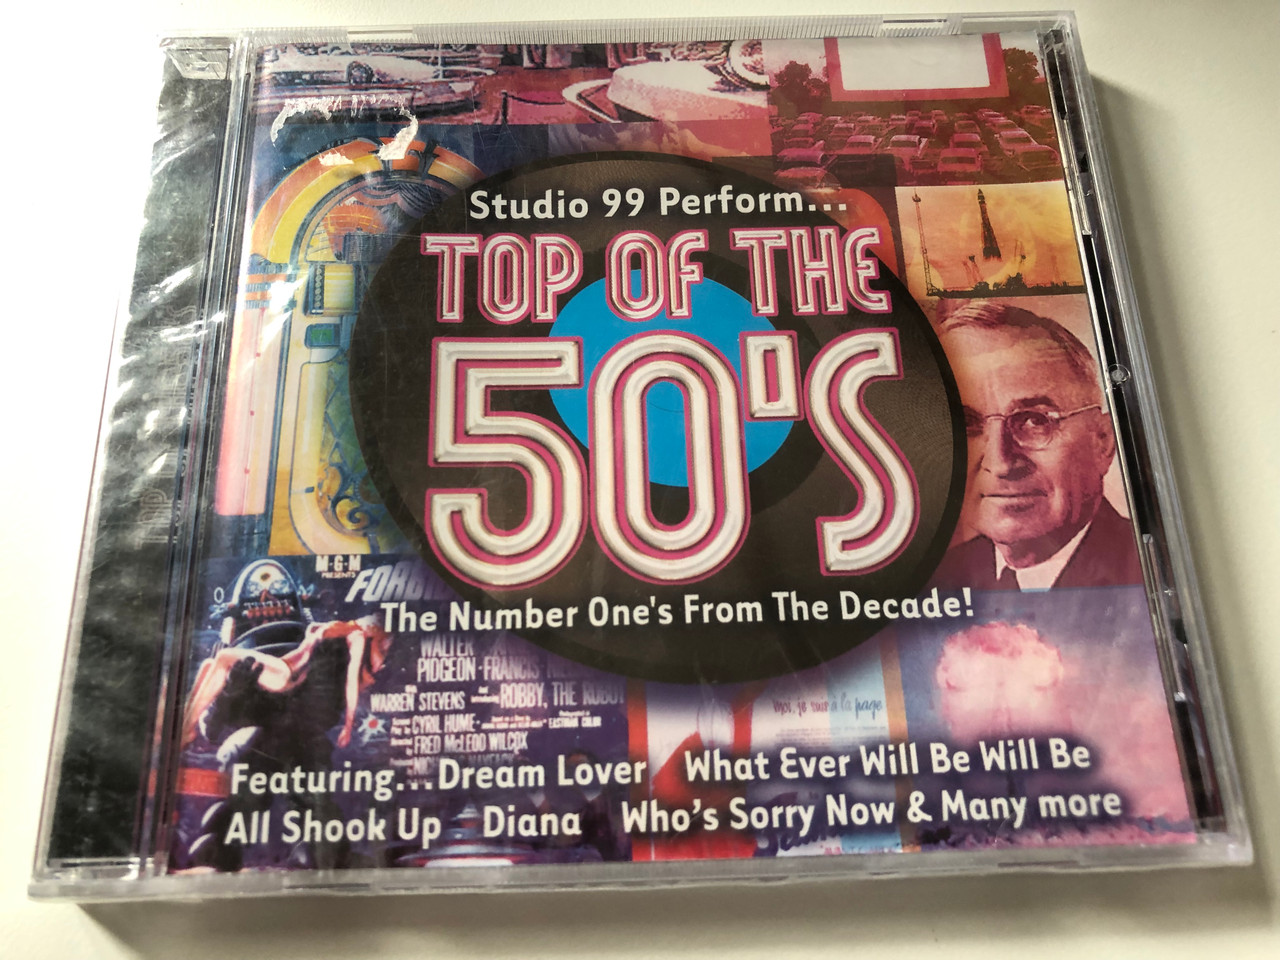 https://cdn10.bigcommerce.com/s-62bdpkt7pb/products/0/images/200277/Studio_99_Perform..._-_Top_Of_The_50s_-_The_Number_Ones_From_The_Decade_Featuring..._Dream_Lover_What_Ever_Will_Be_Will_Be_All_Shook_Up_Diana_Whos_Sorry_Now_Manyy_-More_Cedar_Audio_1__08322.1637740440.1280.1280.JPG?c=2&_gl=1*1m2tg9*_ga*MjA2NTIxMjE2MC4xNTkwNTEyNTMy*_ga_WS2VZYPC6G*MTYzNzczNjc0MC4xODQuMS4xNjM3NzQwMTg3LjU5